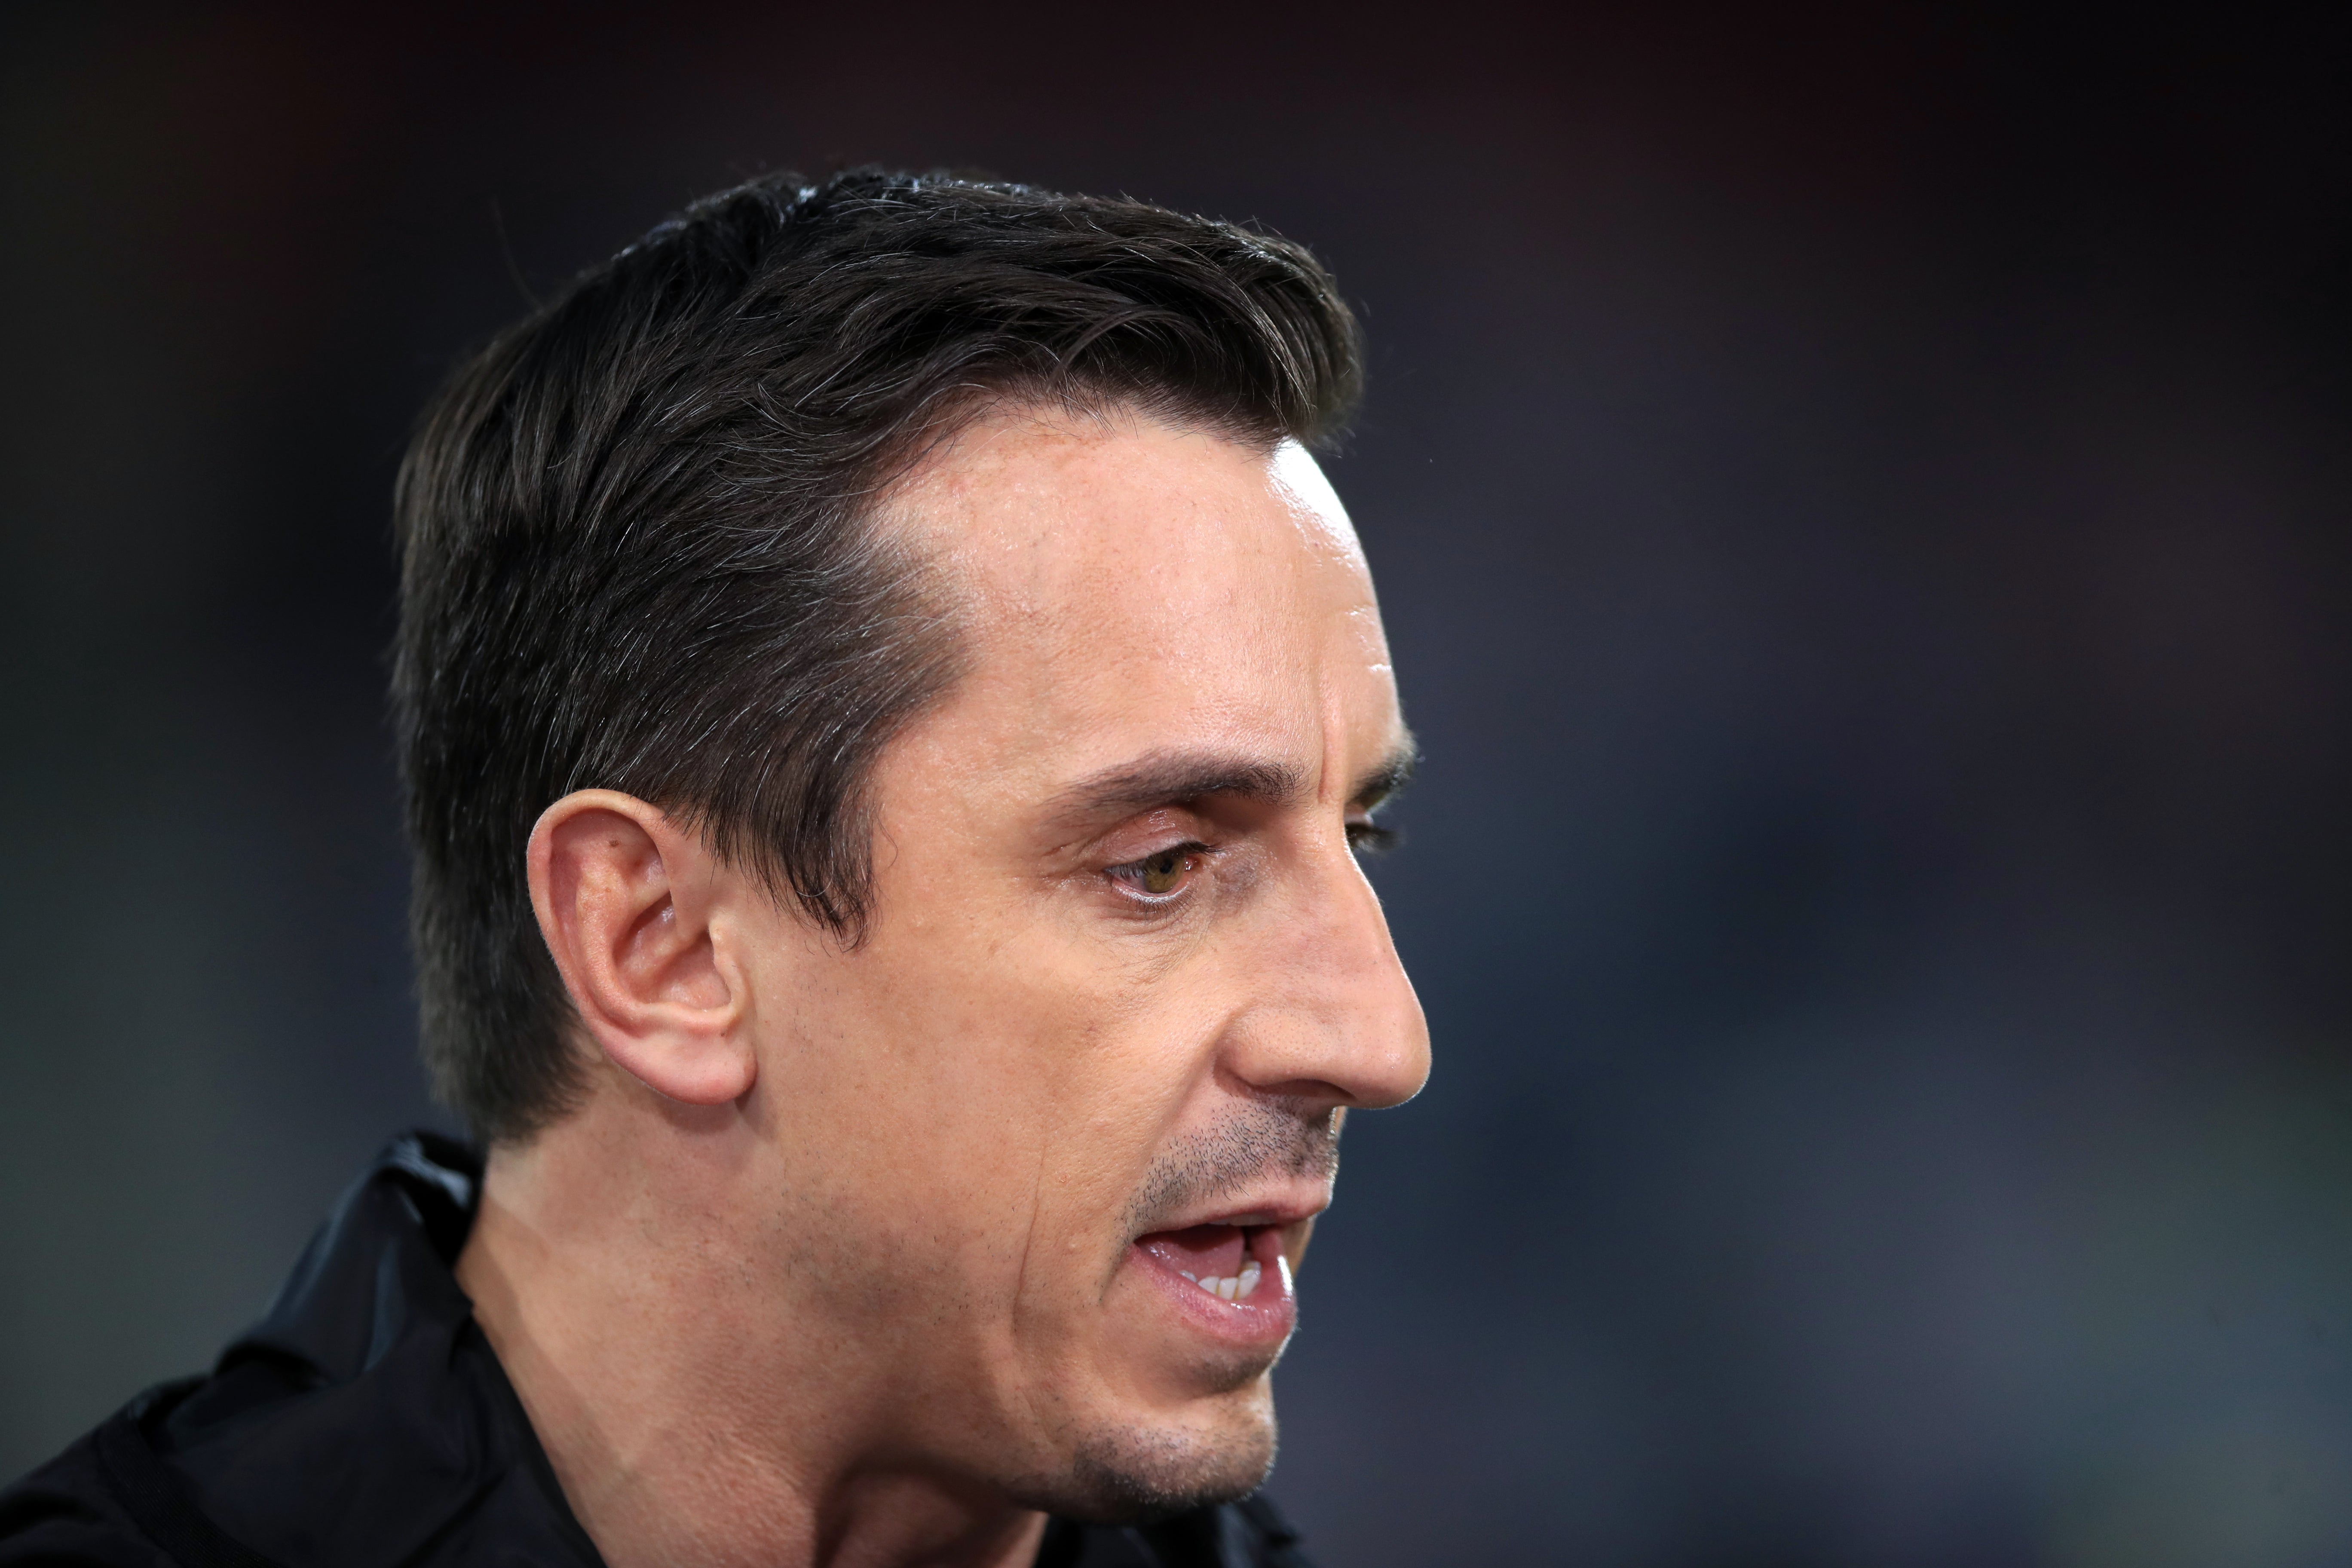 Former England international Neville, 46, has joined Labour but Sir Keir acknowledged they had disagreed in the past about measures to tackle Covid-19 (PA)